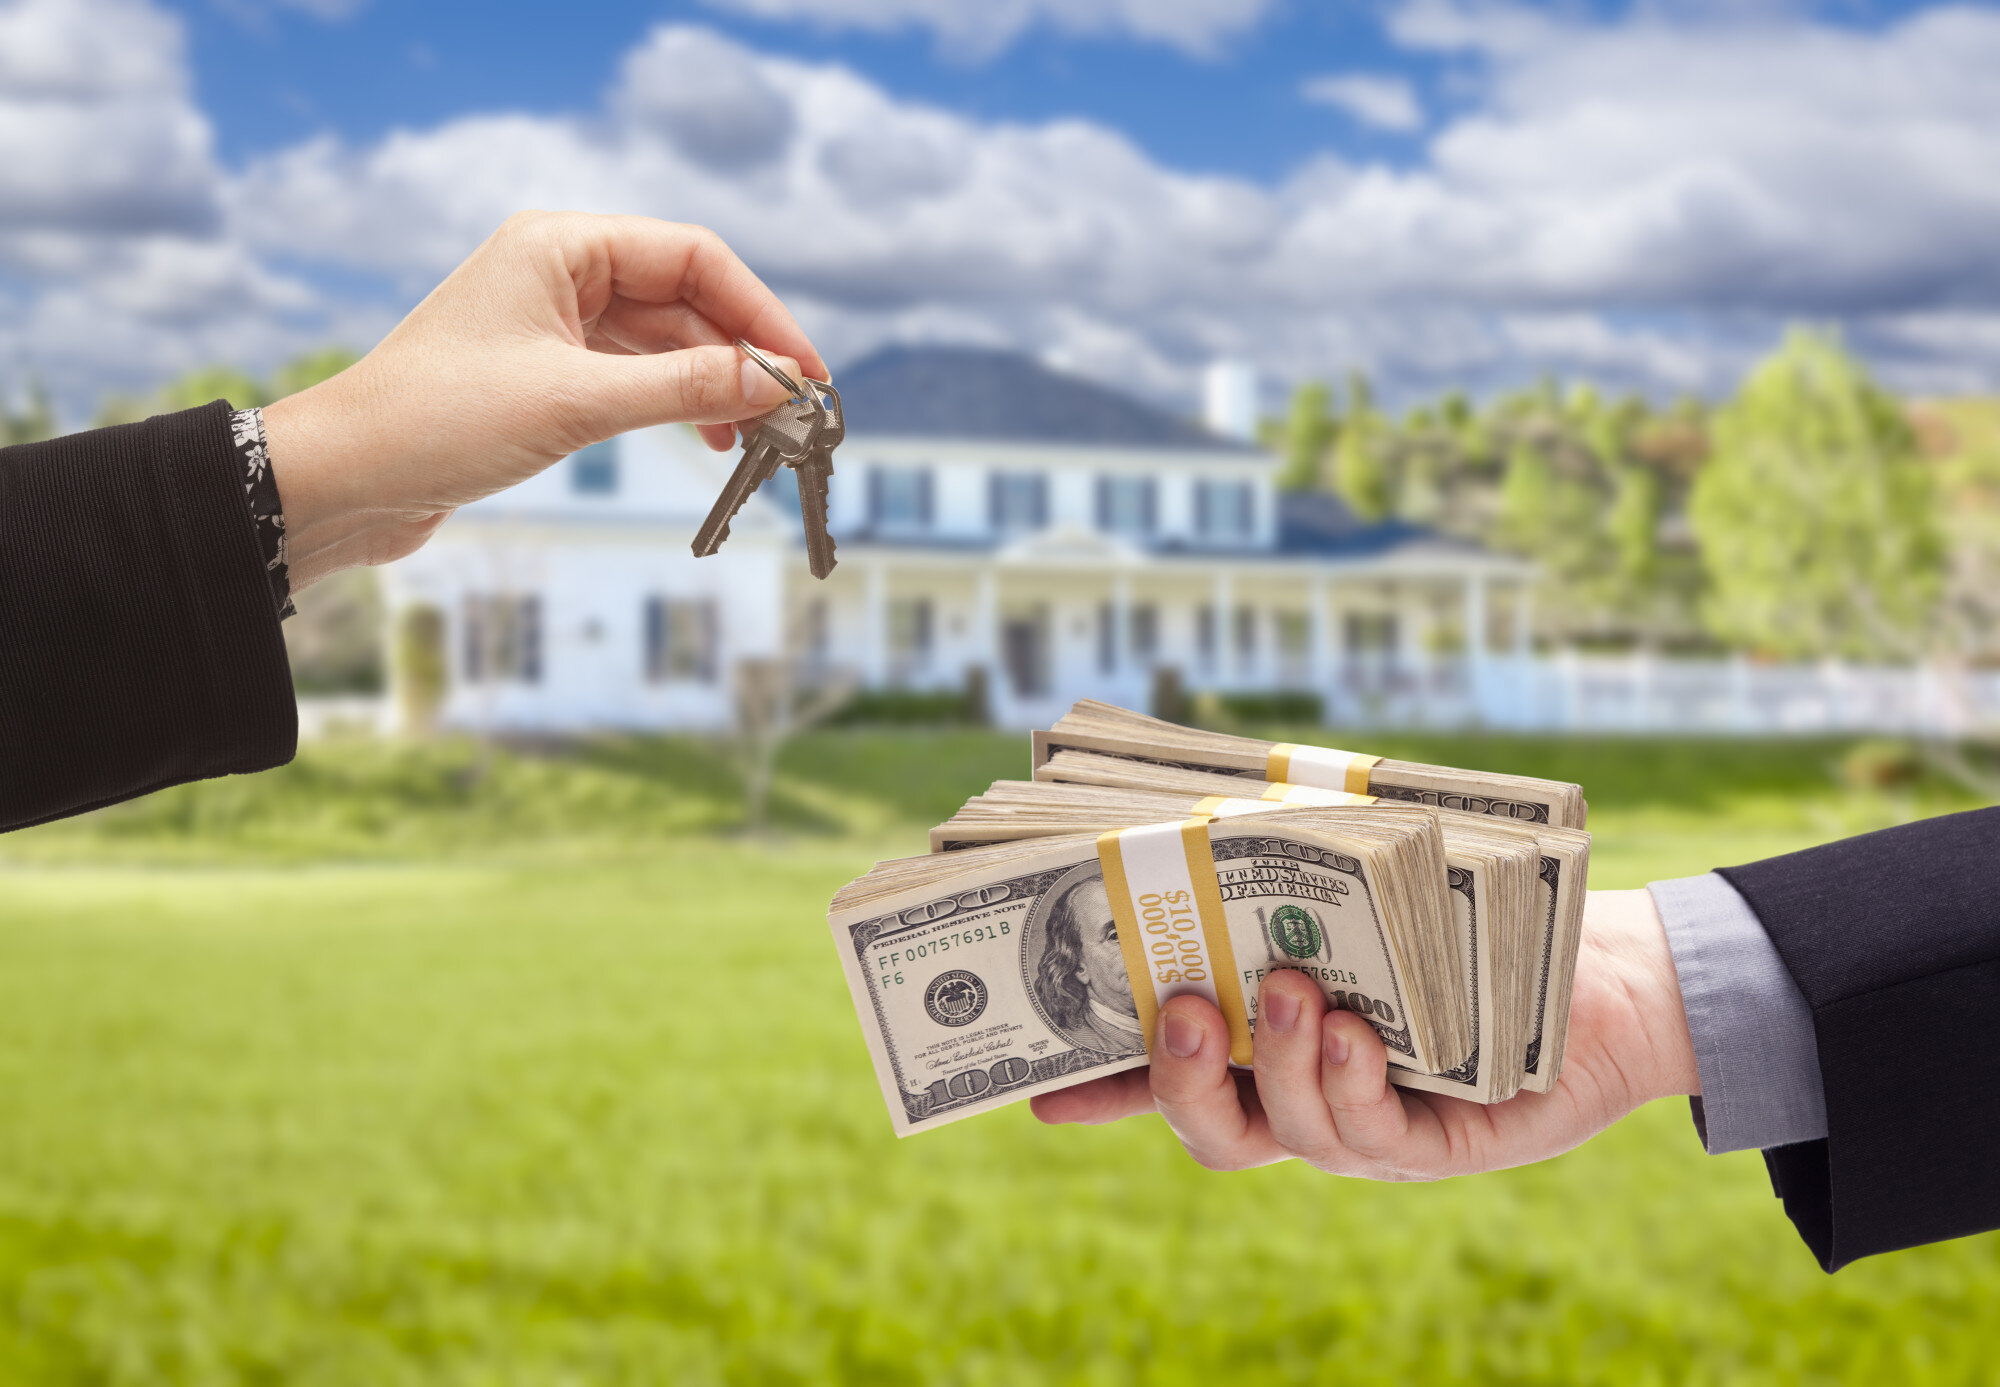 Sell A House For Cash In Cape Coral – Advantages Of Working With Blue Chip Home Solutions